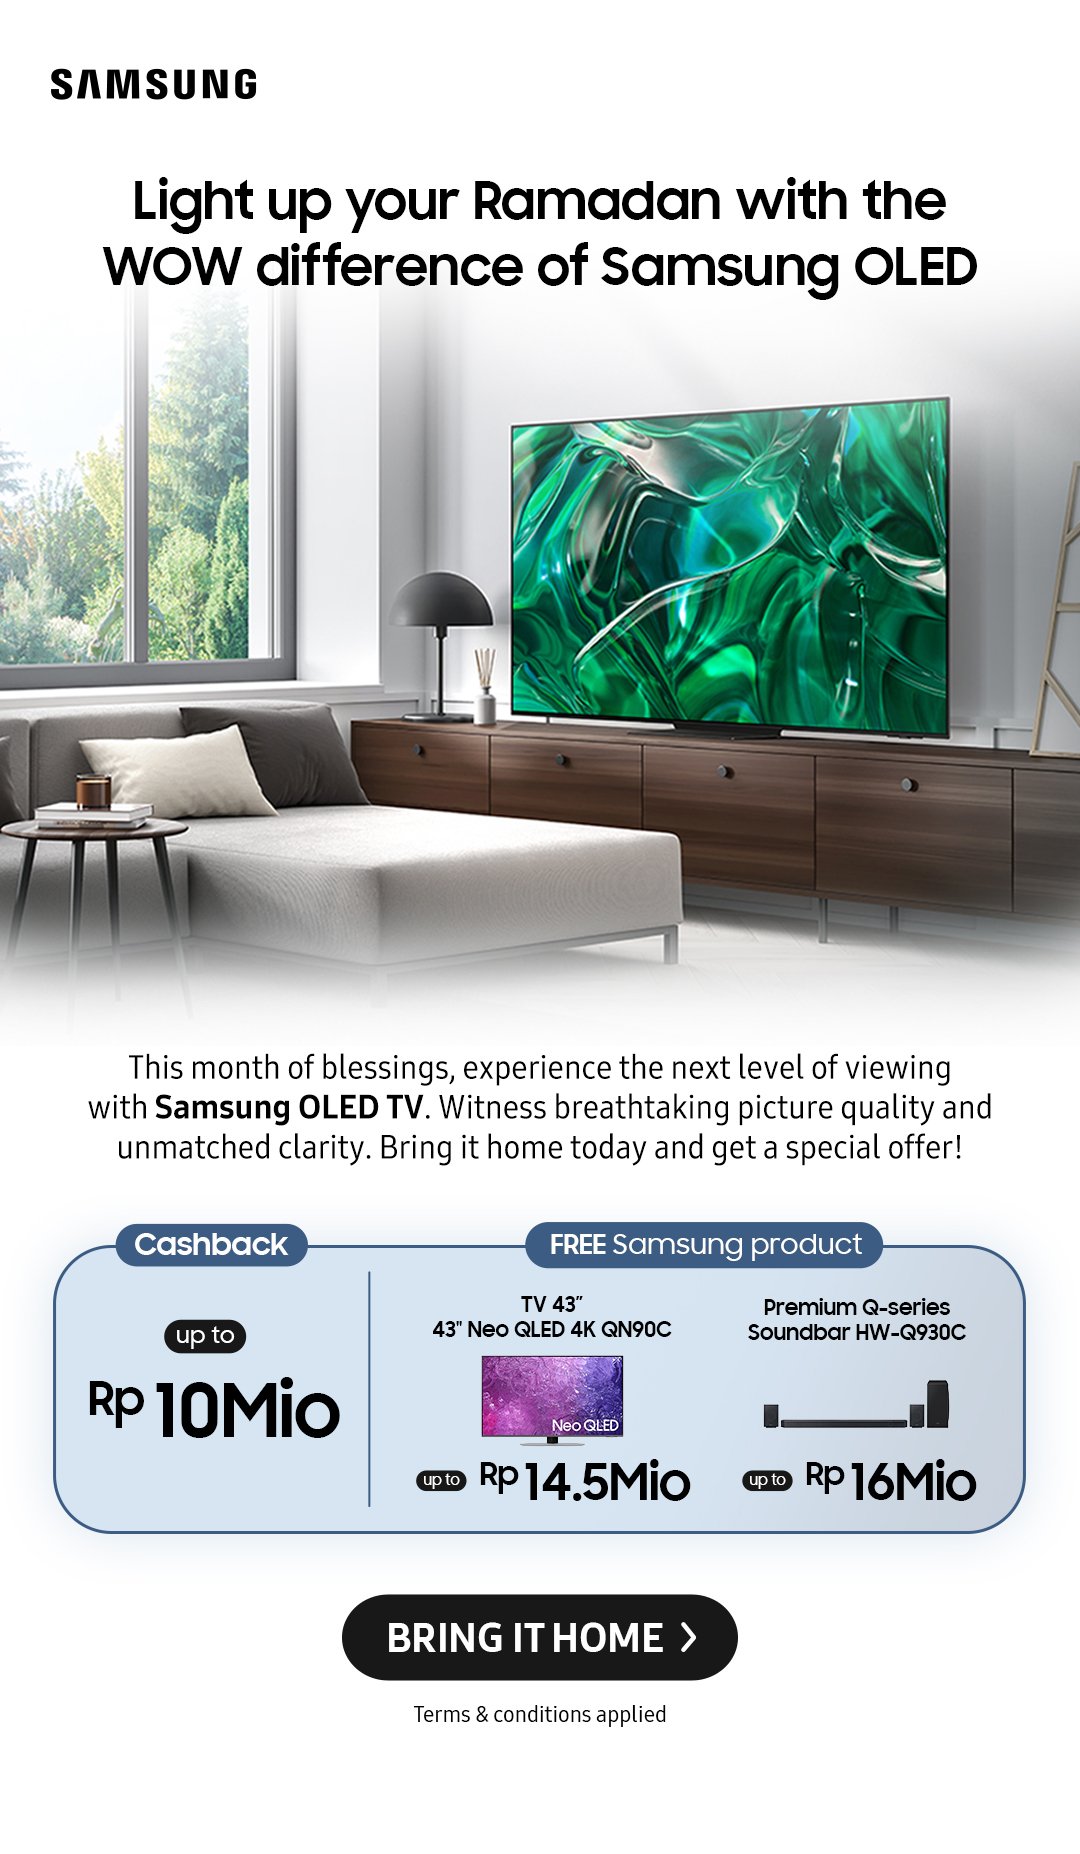 Light up your Ramadan with the WOW difference of Samsung OLED | This month of blessings, experience the next level of viewing with Samsung OLED TV. Witness breathtaking picture quality and unmatched clarity. Bring it home today and get a special offer!